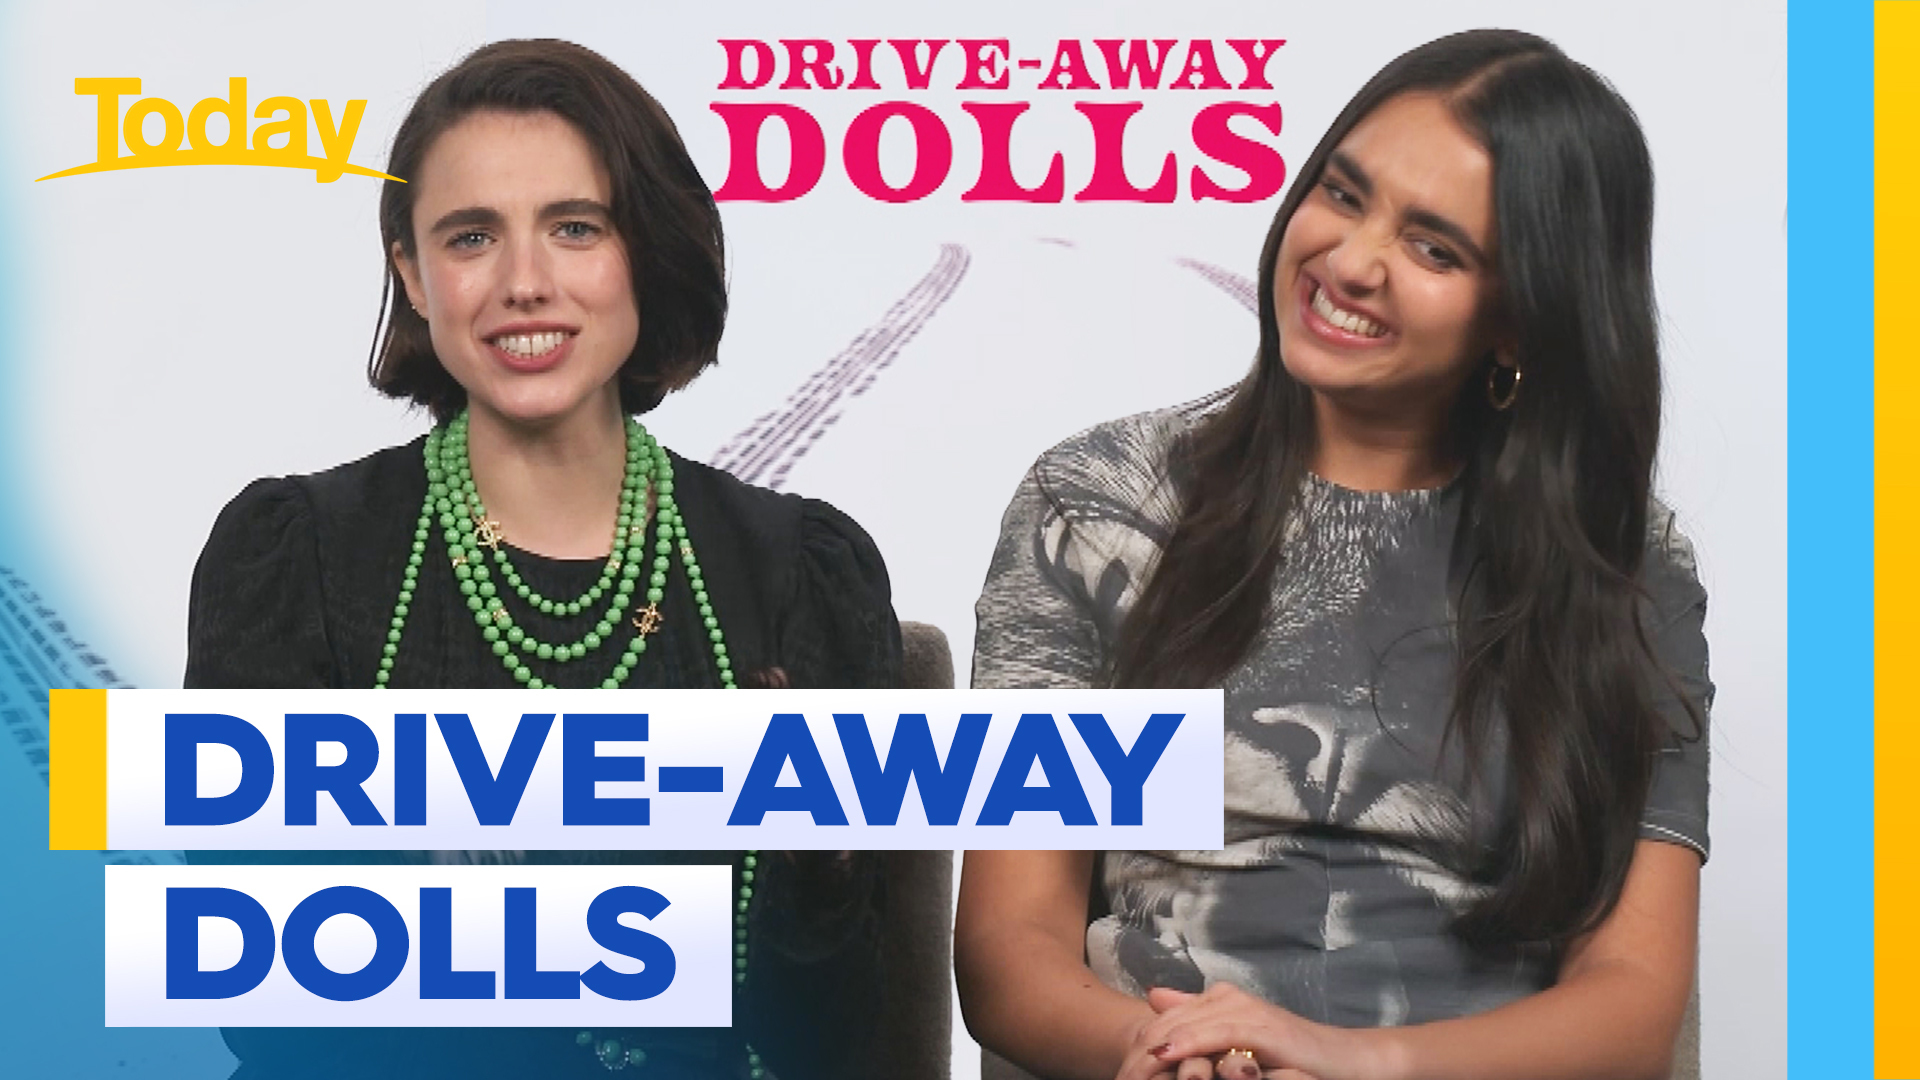 Drive-Away Dolls stars catch up with Today